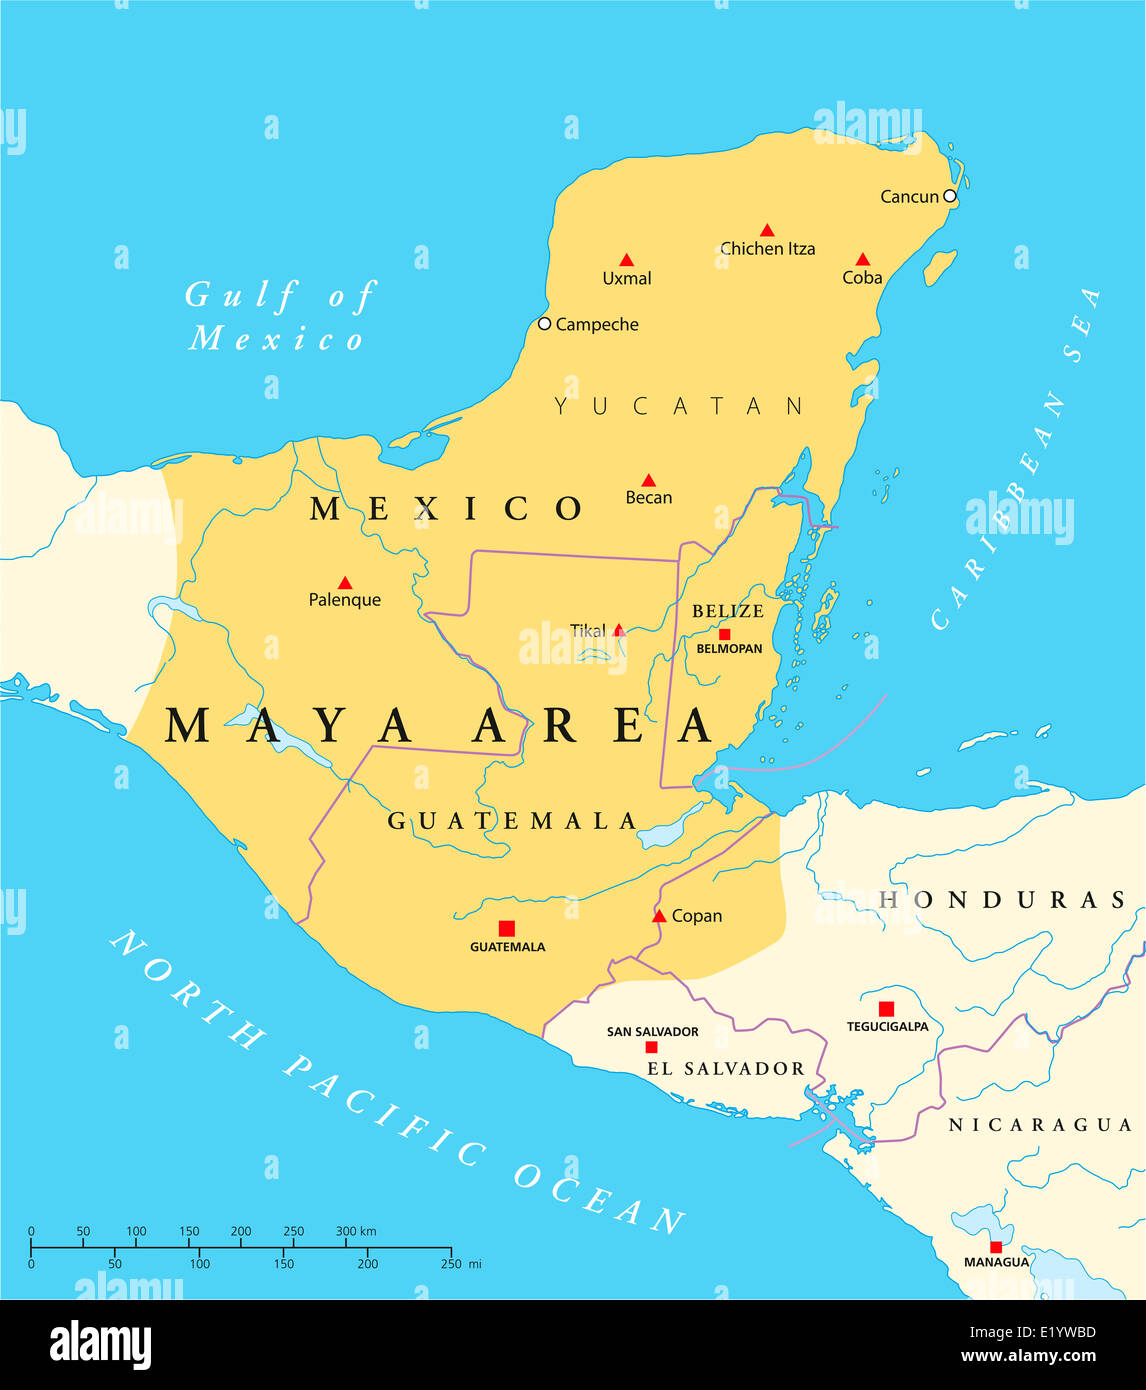 Maya High Culture Area Map Political Map With Capitals National Borders E1YWBD 